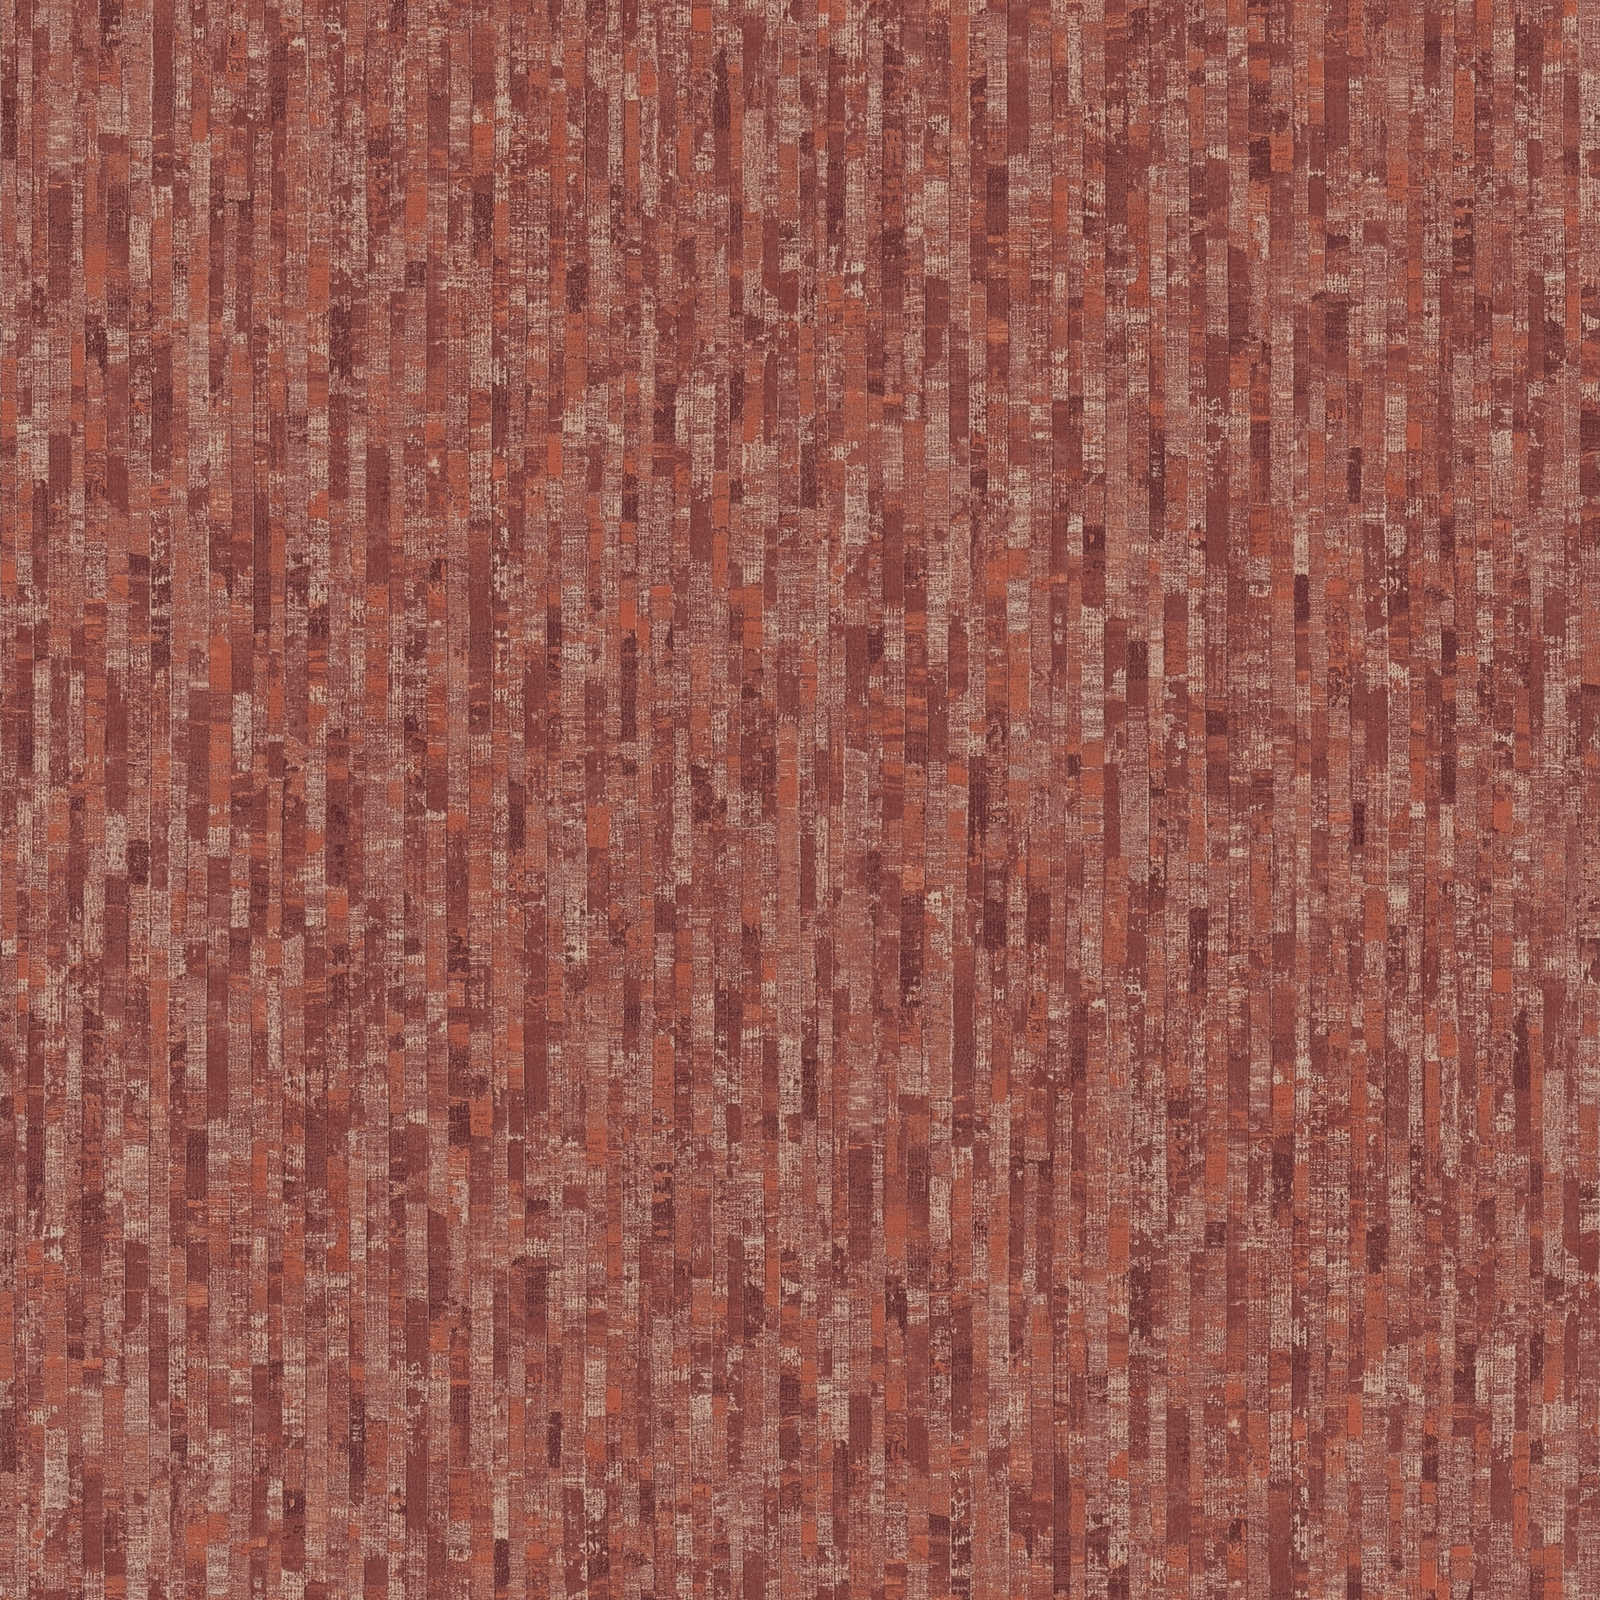 Rust-coloured wallpaper with natural textured pattern - red
